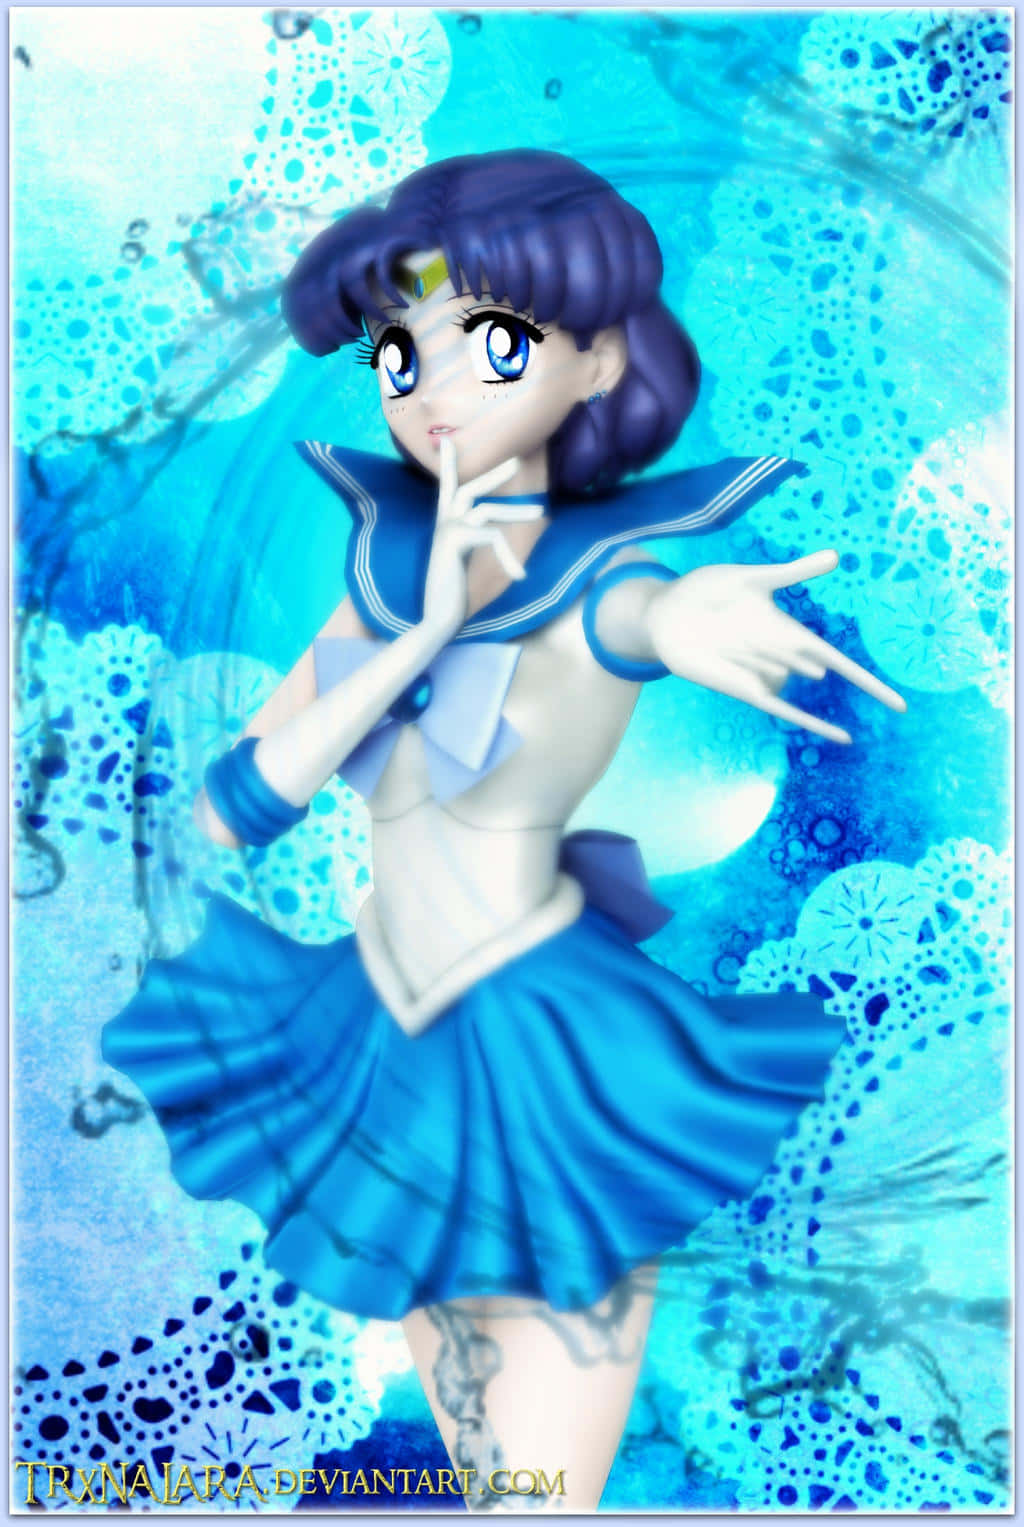 Sailor Mercury Using Her Power To Protect The World.